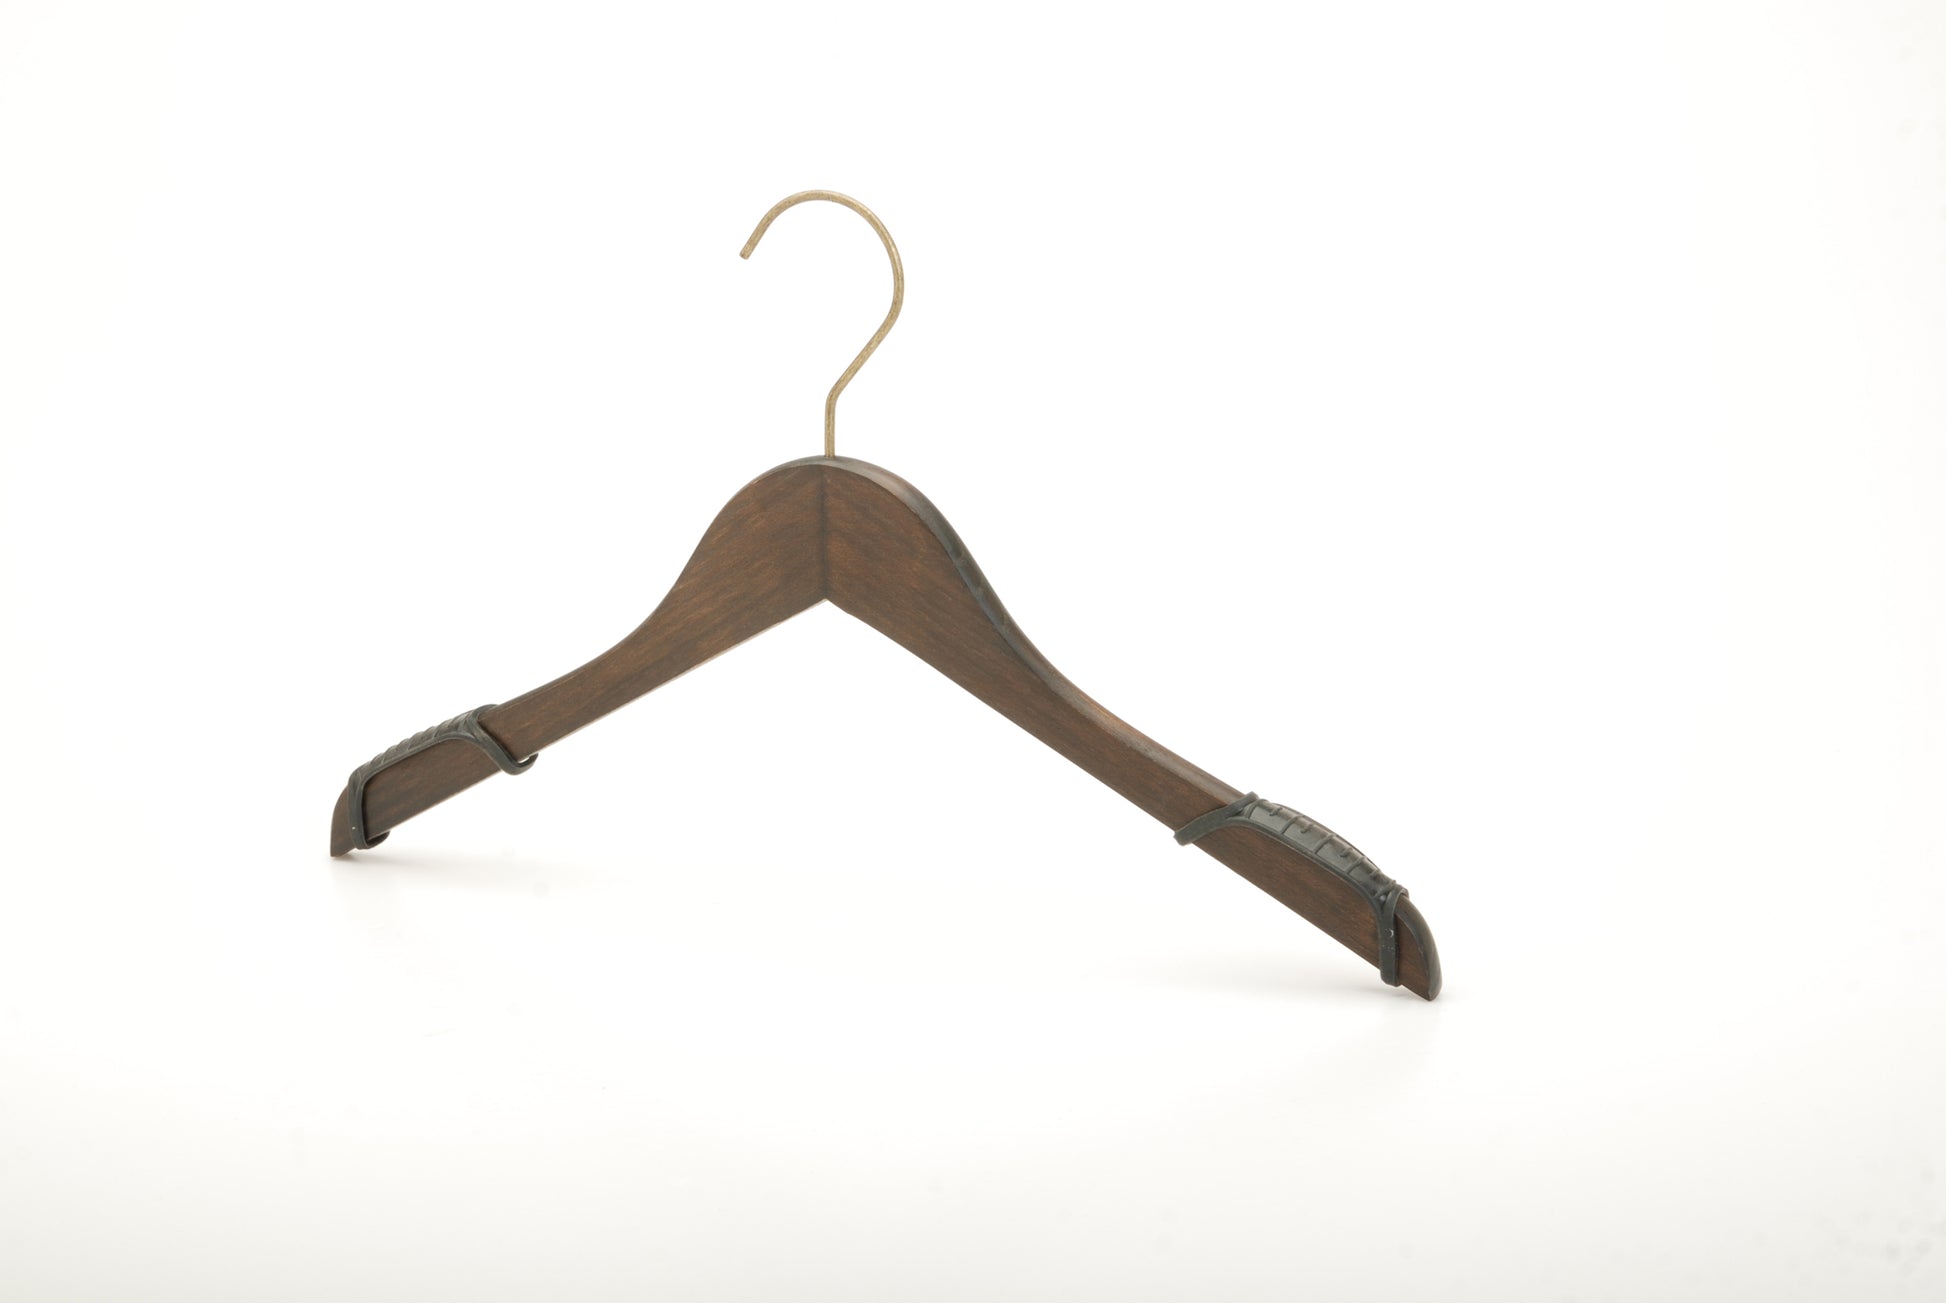 A wooden coat hanger with a brass hook is shown against a plain white background. The Hangers of London Wooden Antique finish Top 38cm, featuring an antique finish, has curved ends to support the shoulders of garments and black non-slip grips on the sides, adding a touch of vintage charm.